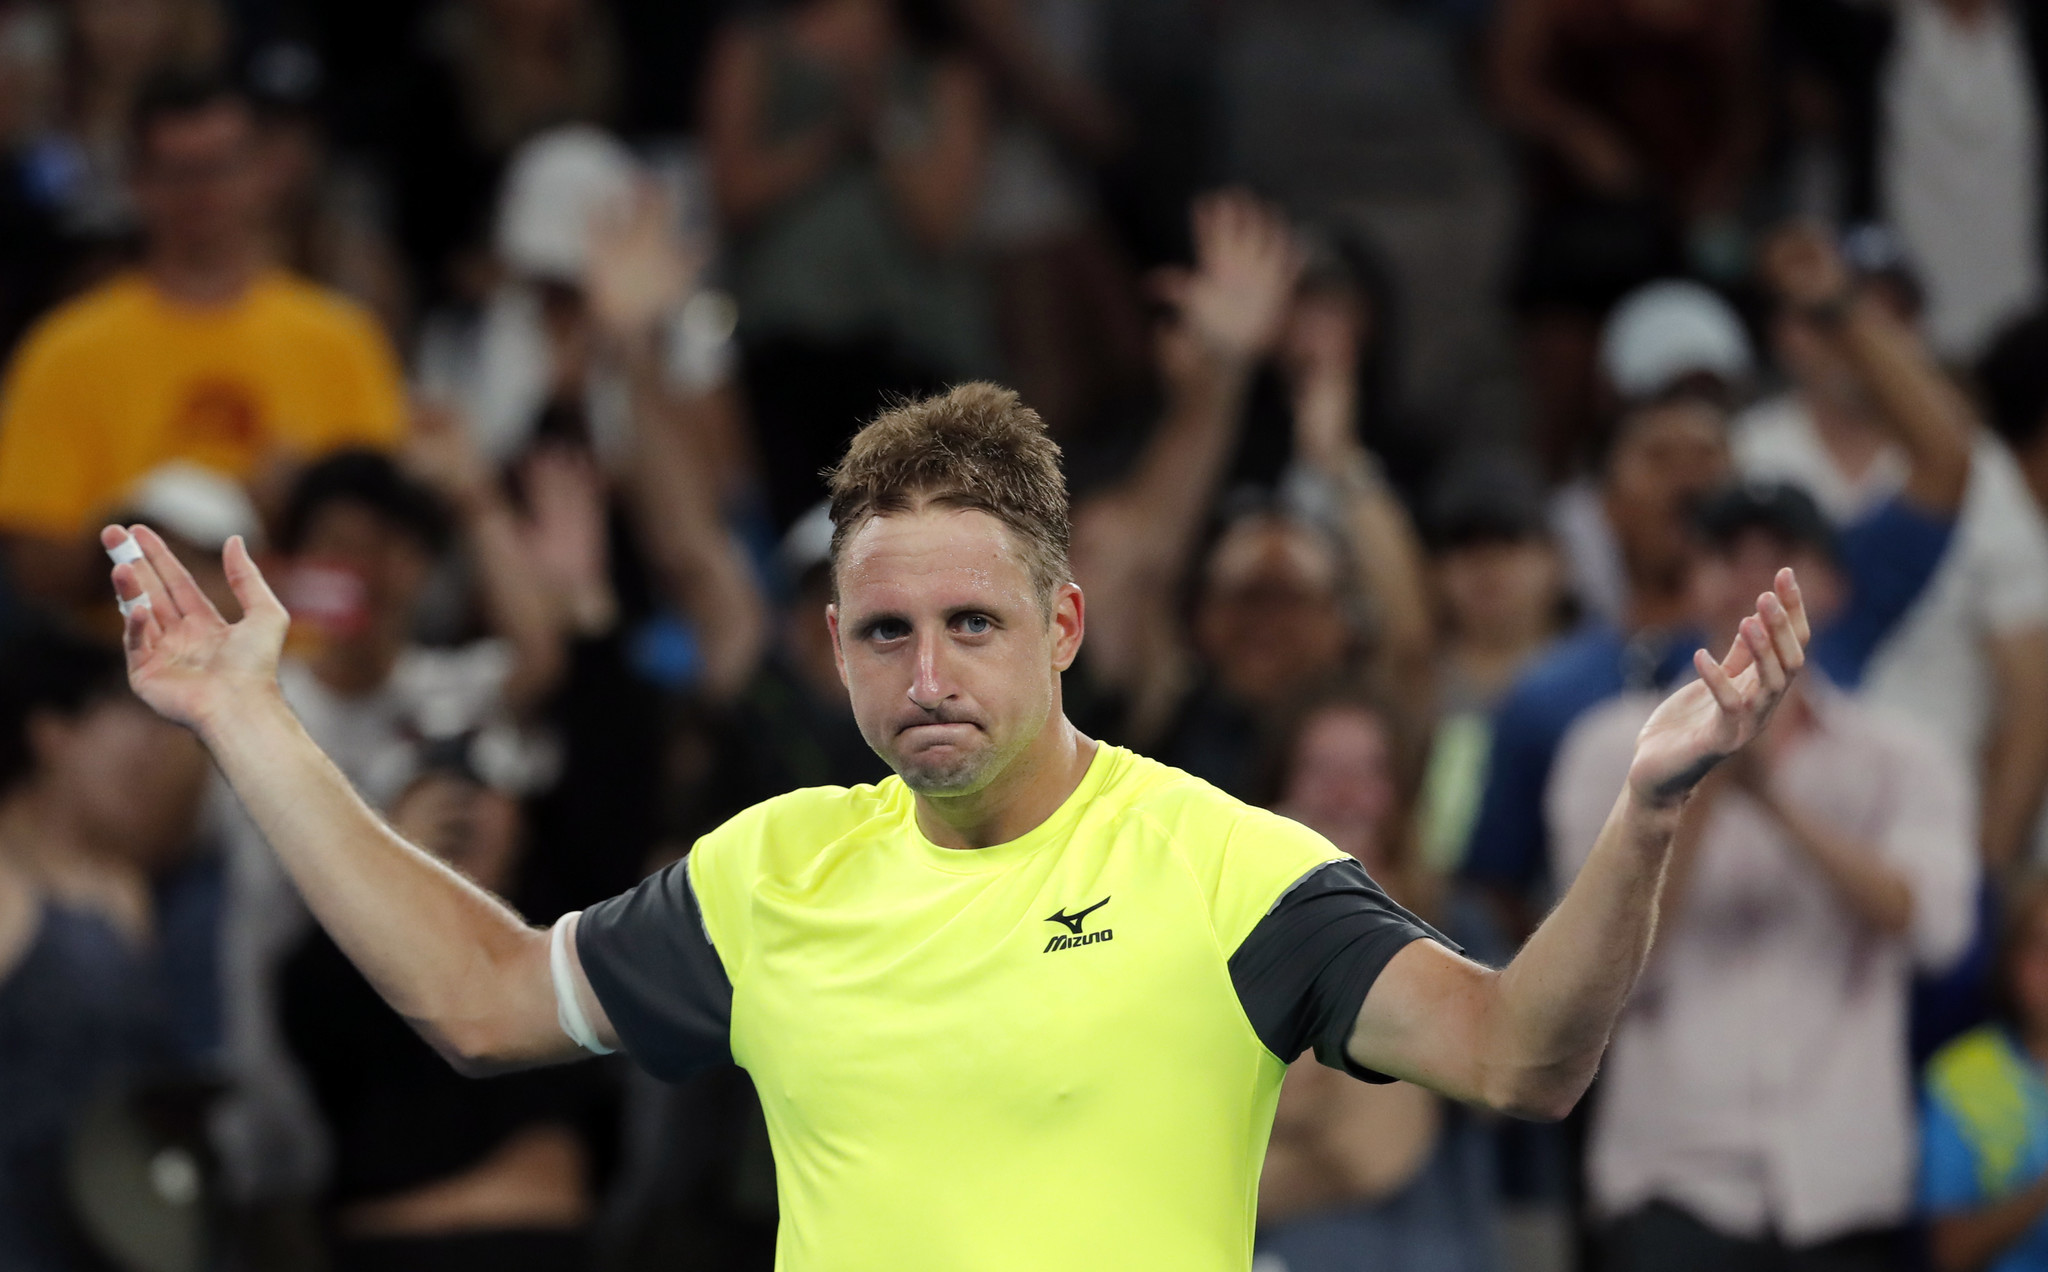 Why Tennys Sandgren was asked about pizzagate at the Australian Open - Chicago Tribune2048 x 1272